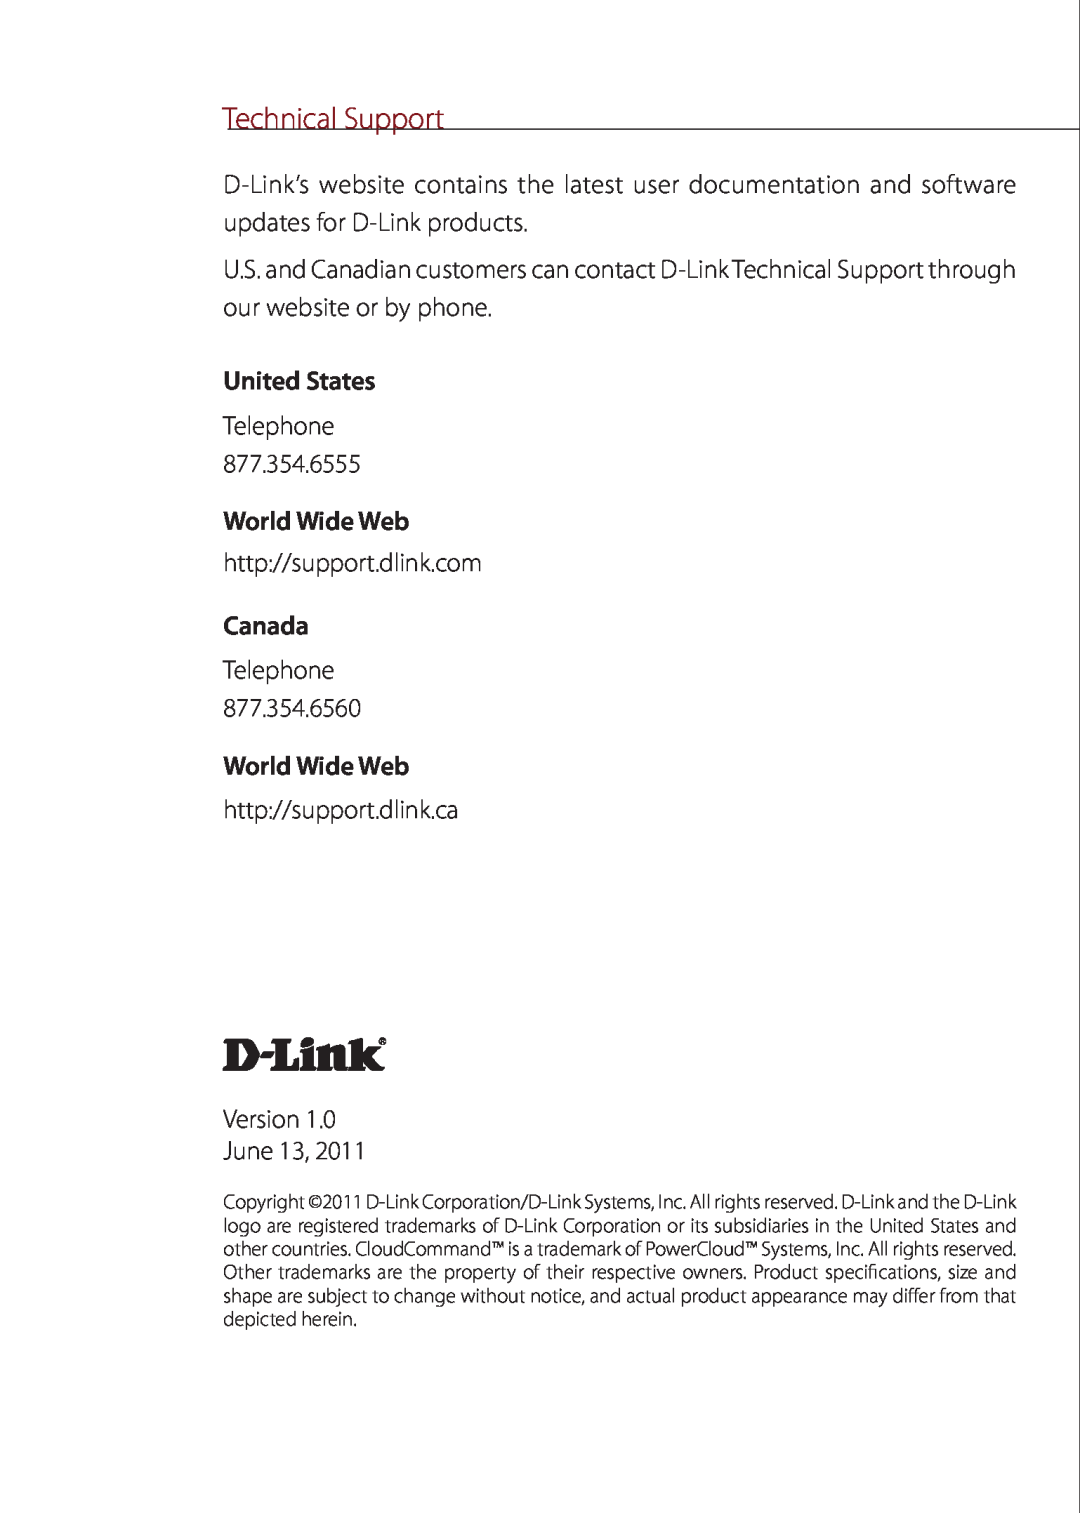 D-Link airpremier n dual band poe access point manual Technical Support, United States, World Wide Web, Canada 